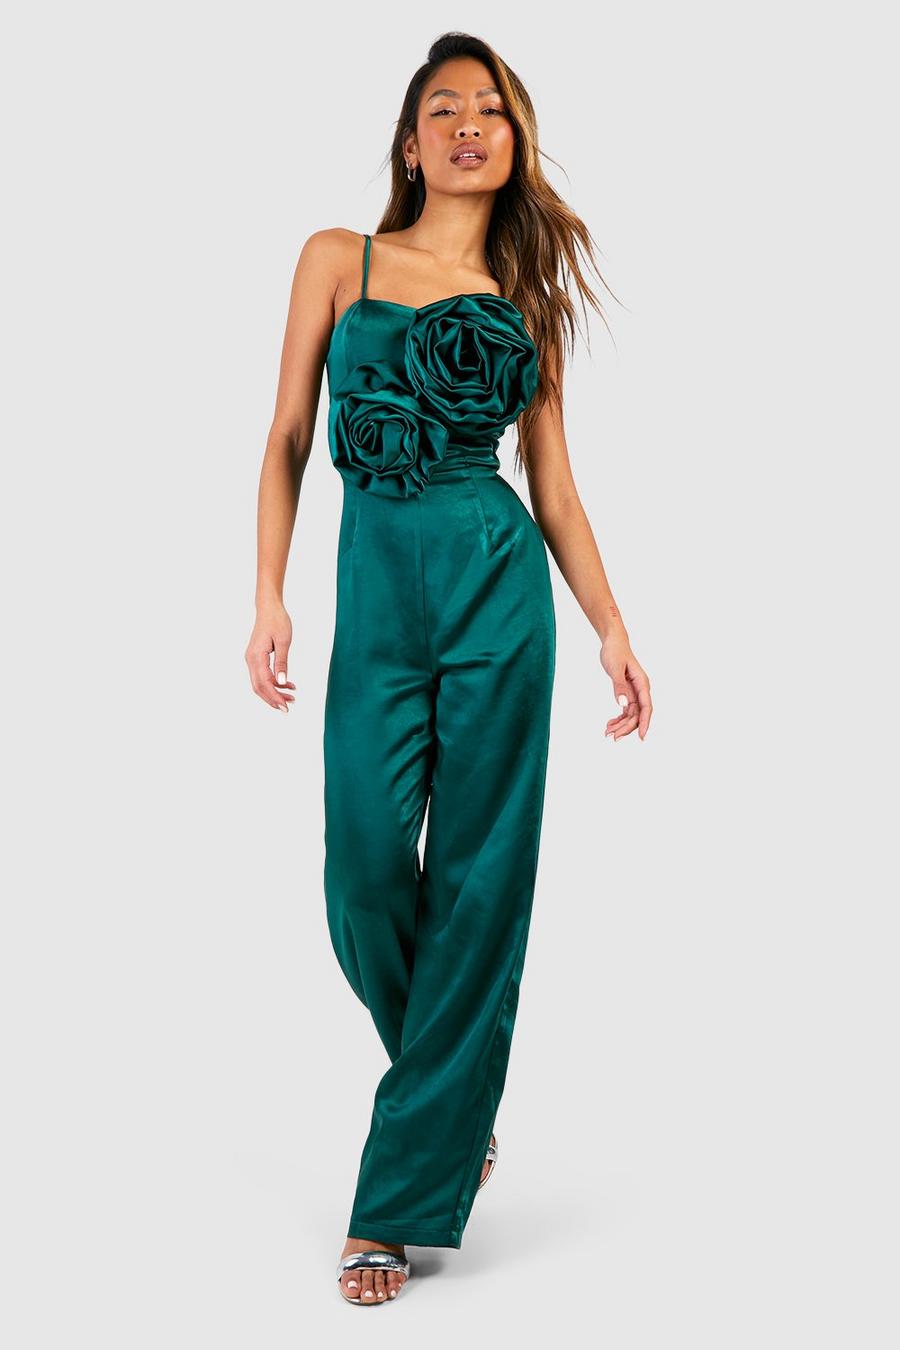 Teal green Rose Front Strappy Jumpsuit